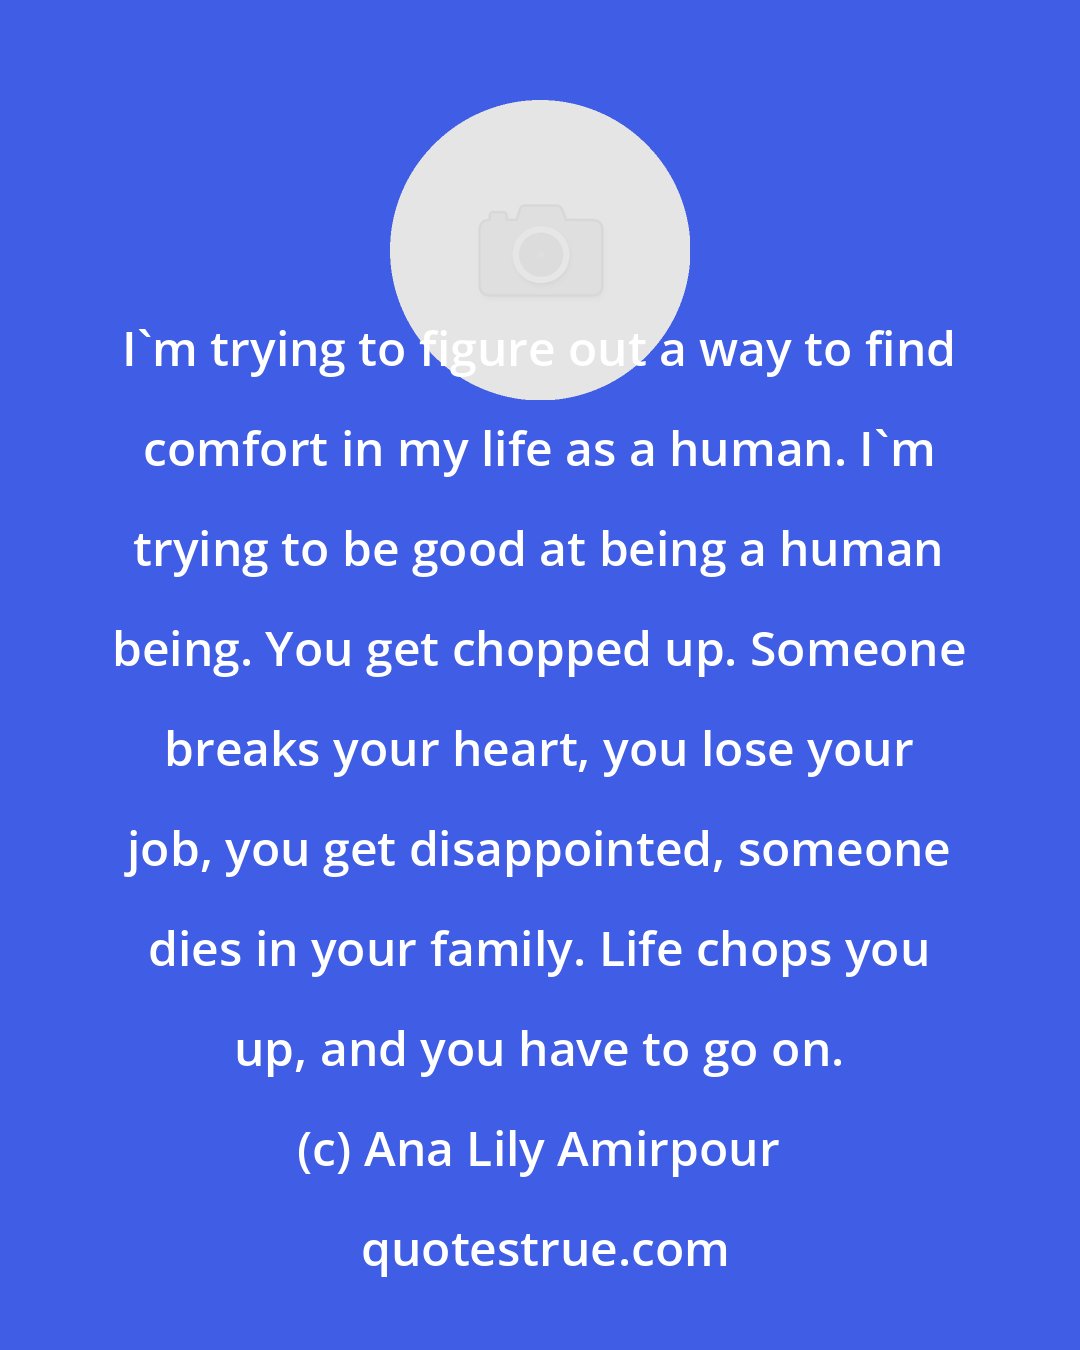 Ana Lily Amirpour: I'm trying to figure out a way to find comfort in my life as a human. I'm trying to be good at being a human being. You get chopped up. Someone breaks your heart, you lose your job, you get disappointed, someone dies in your family. Life chops you up, and you have to go on.